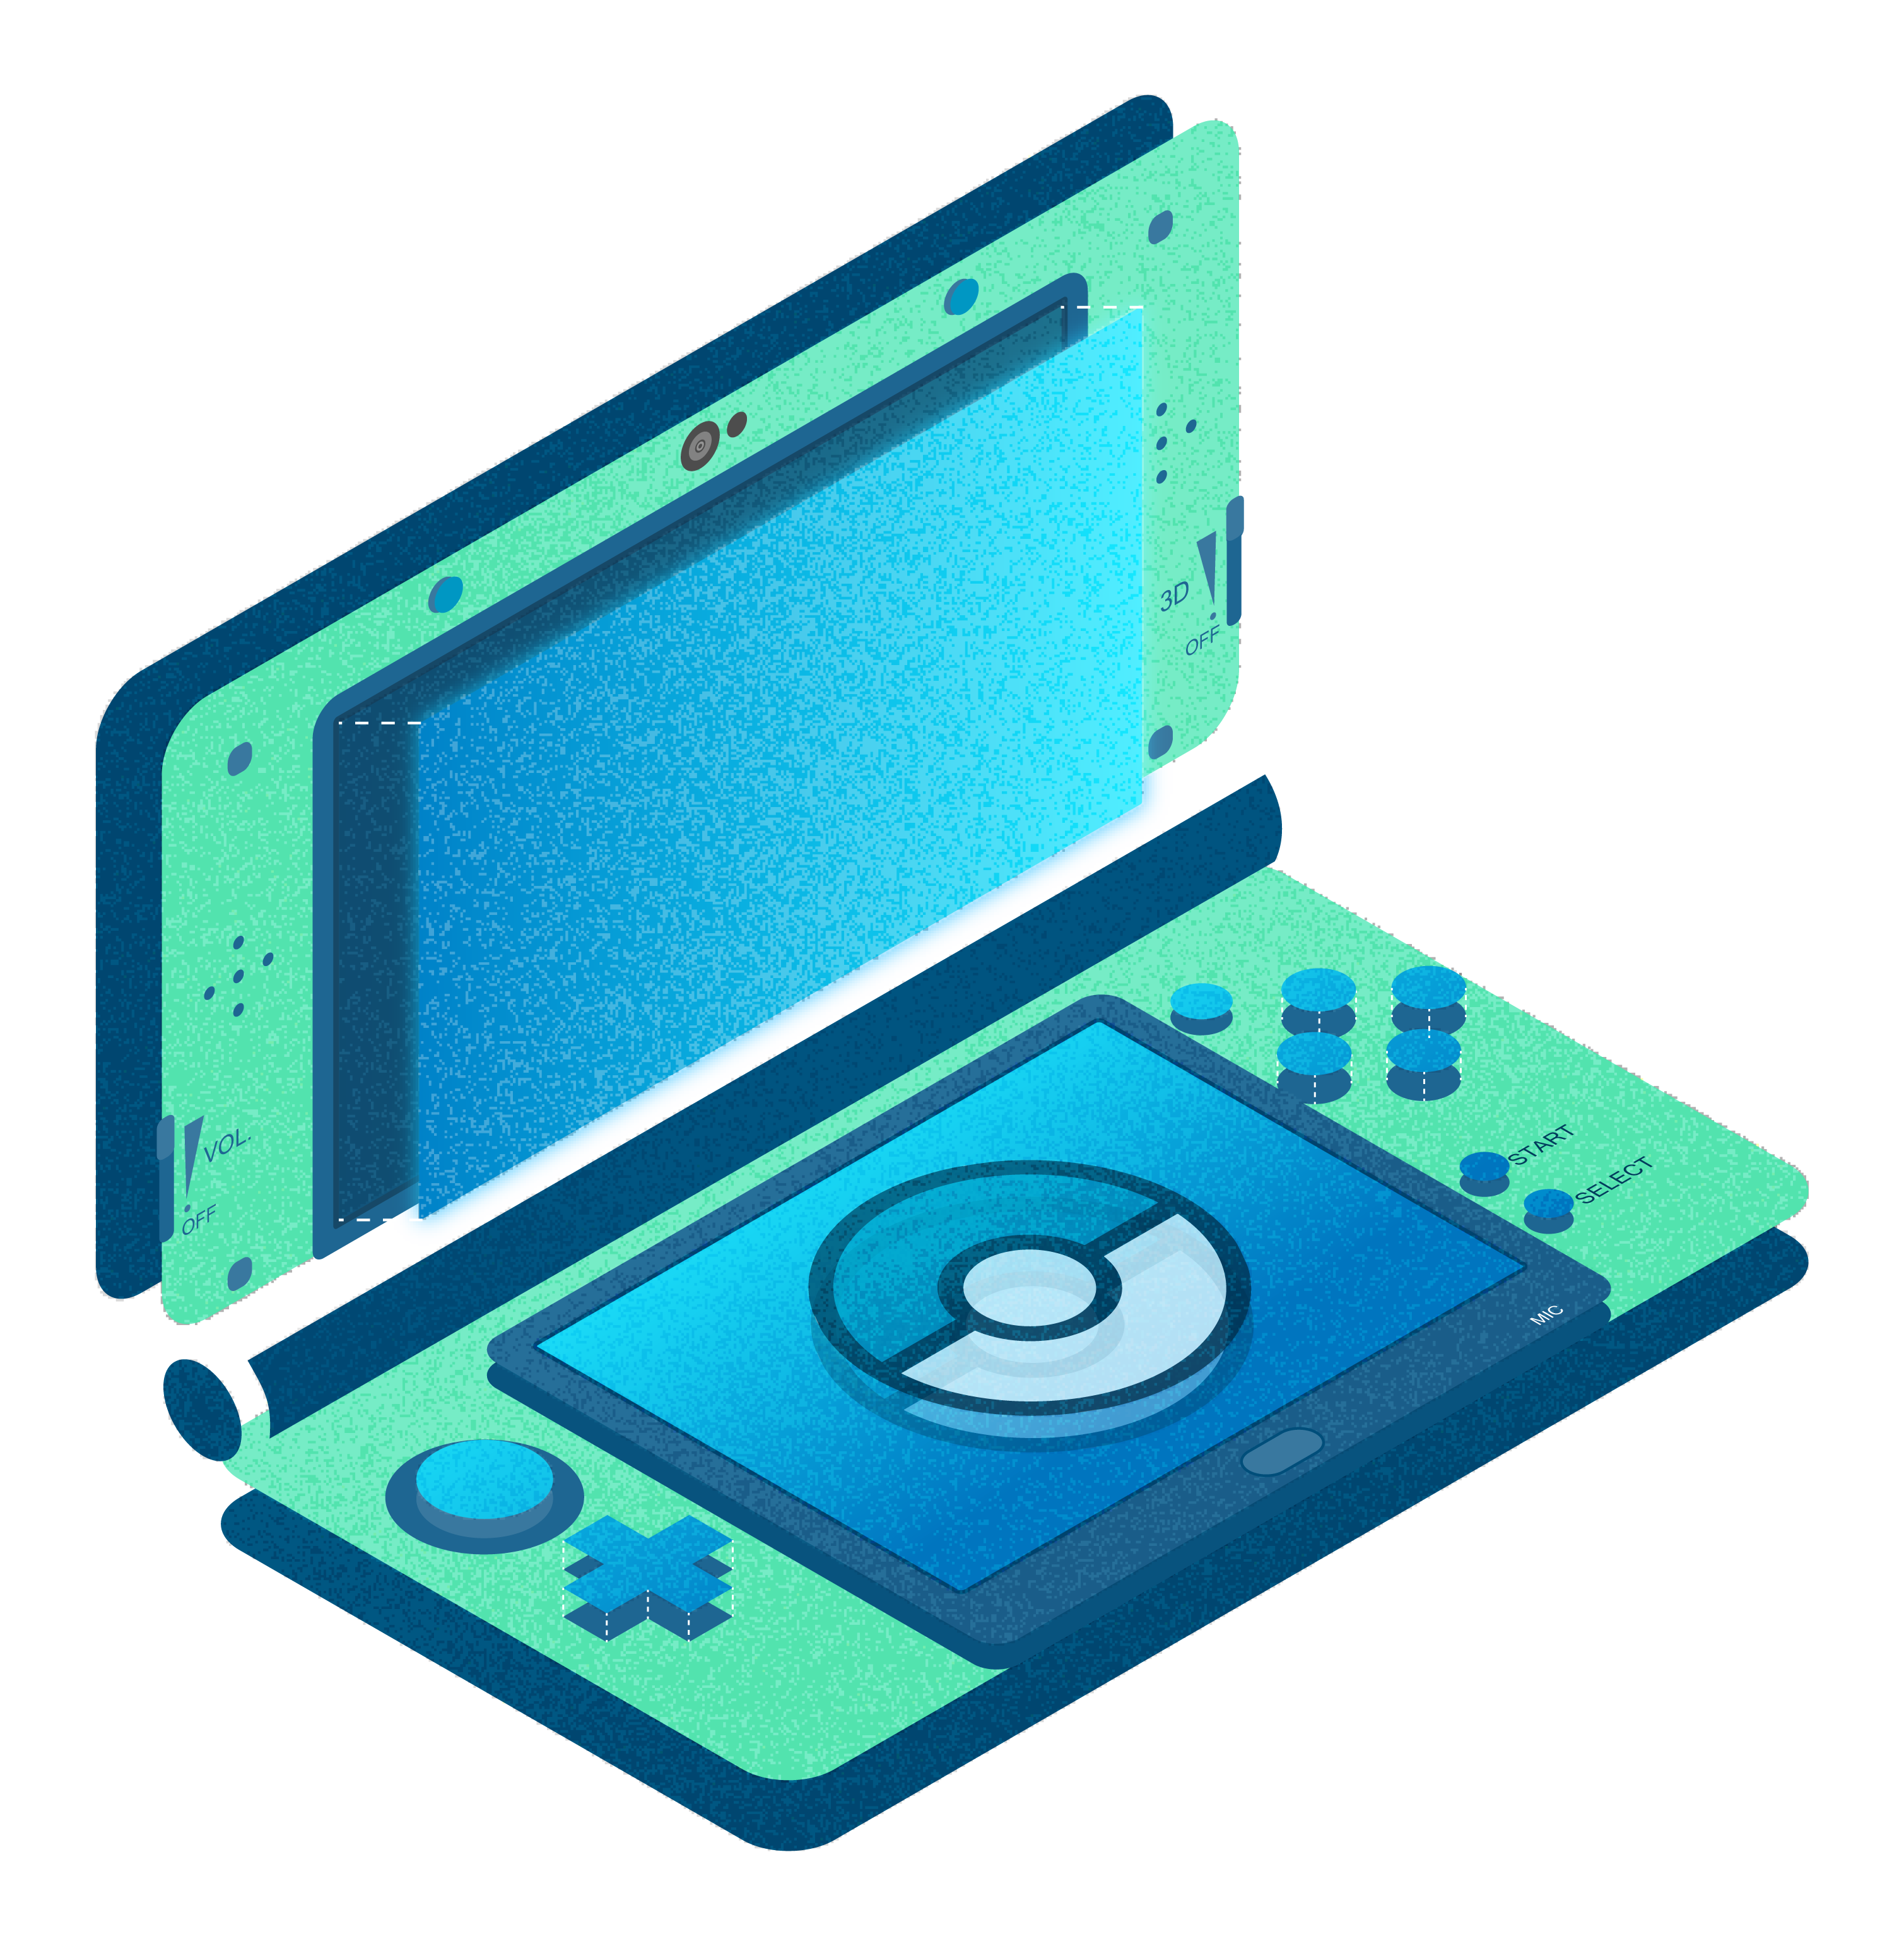 Isometric design of the Nintendo 3DS game console